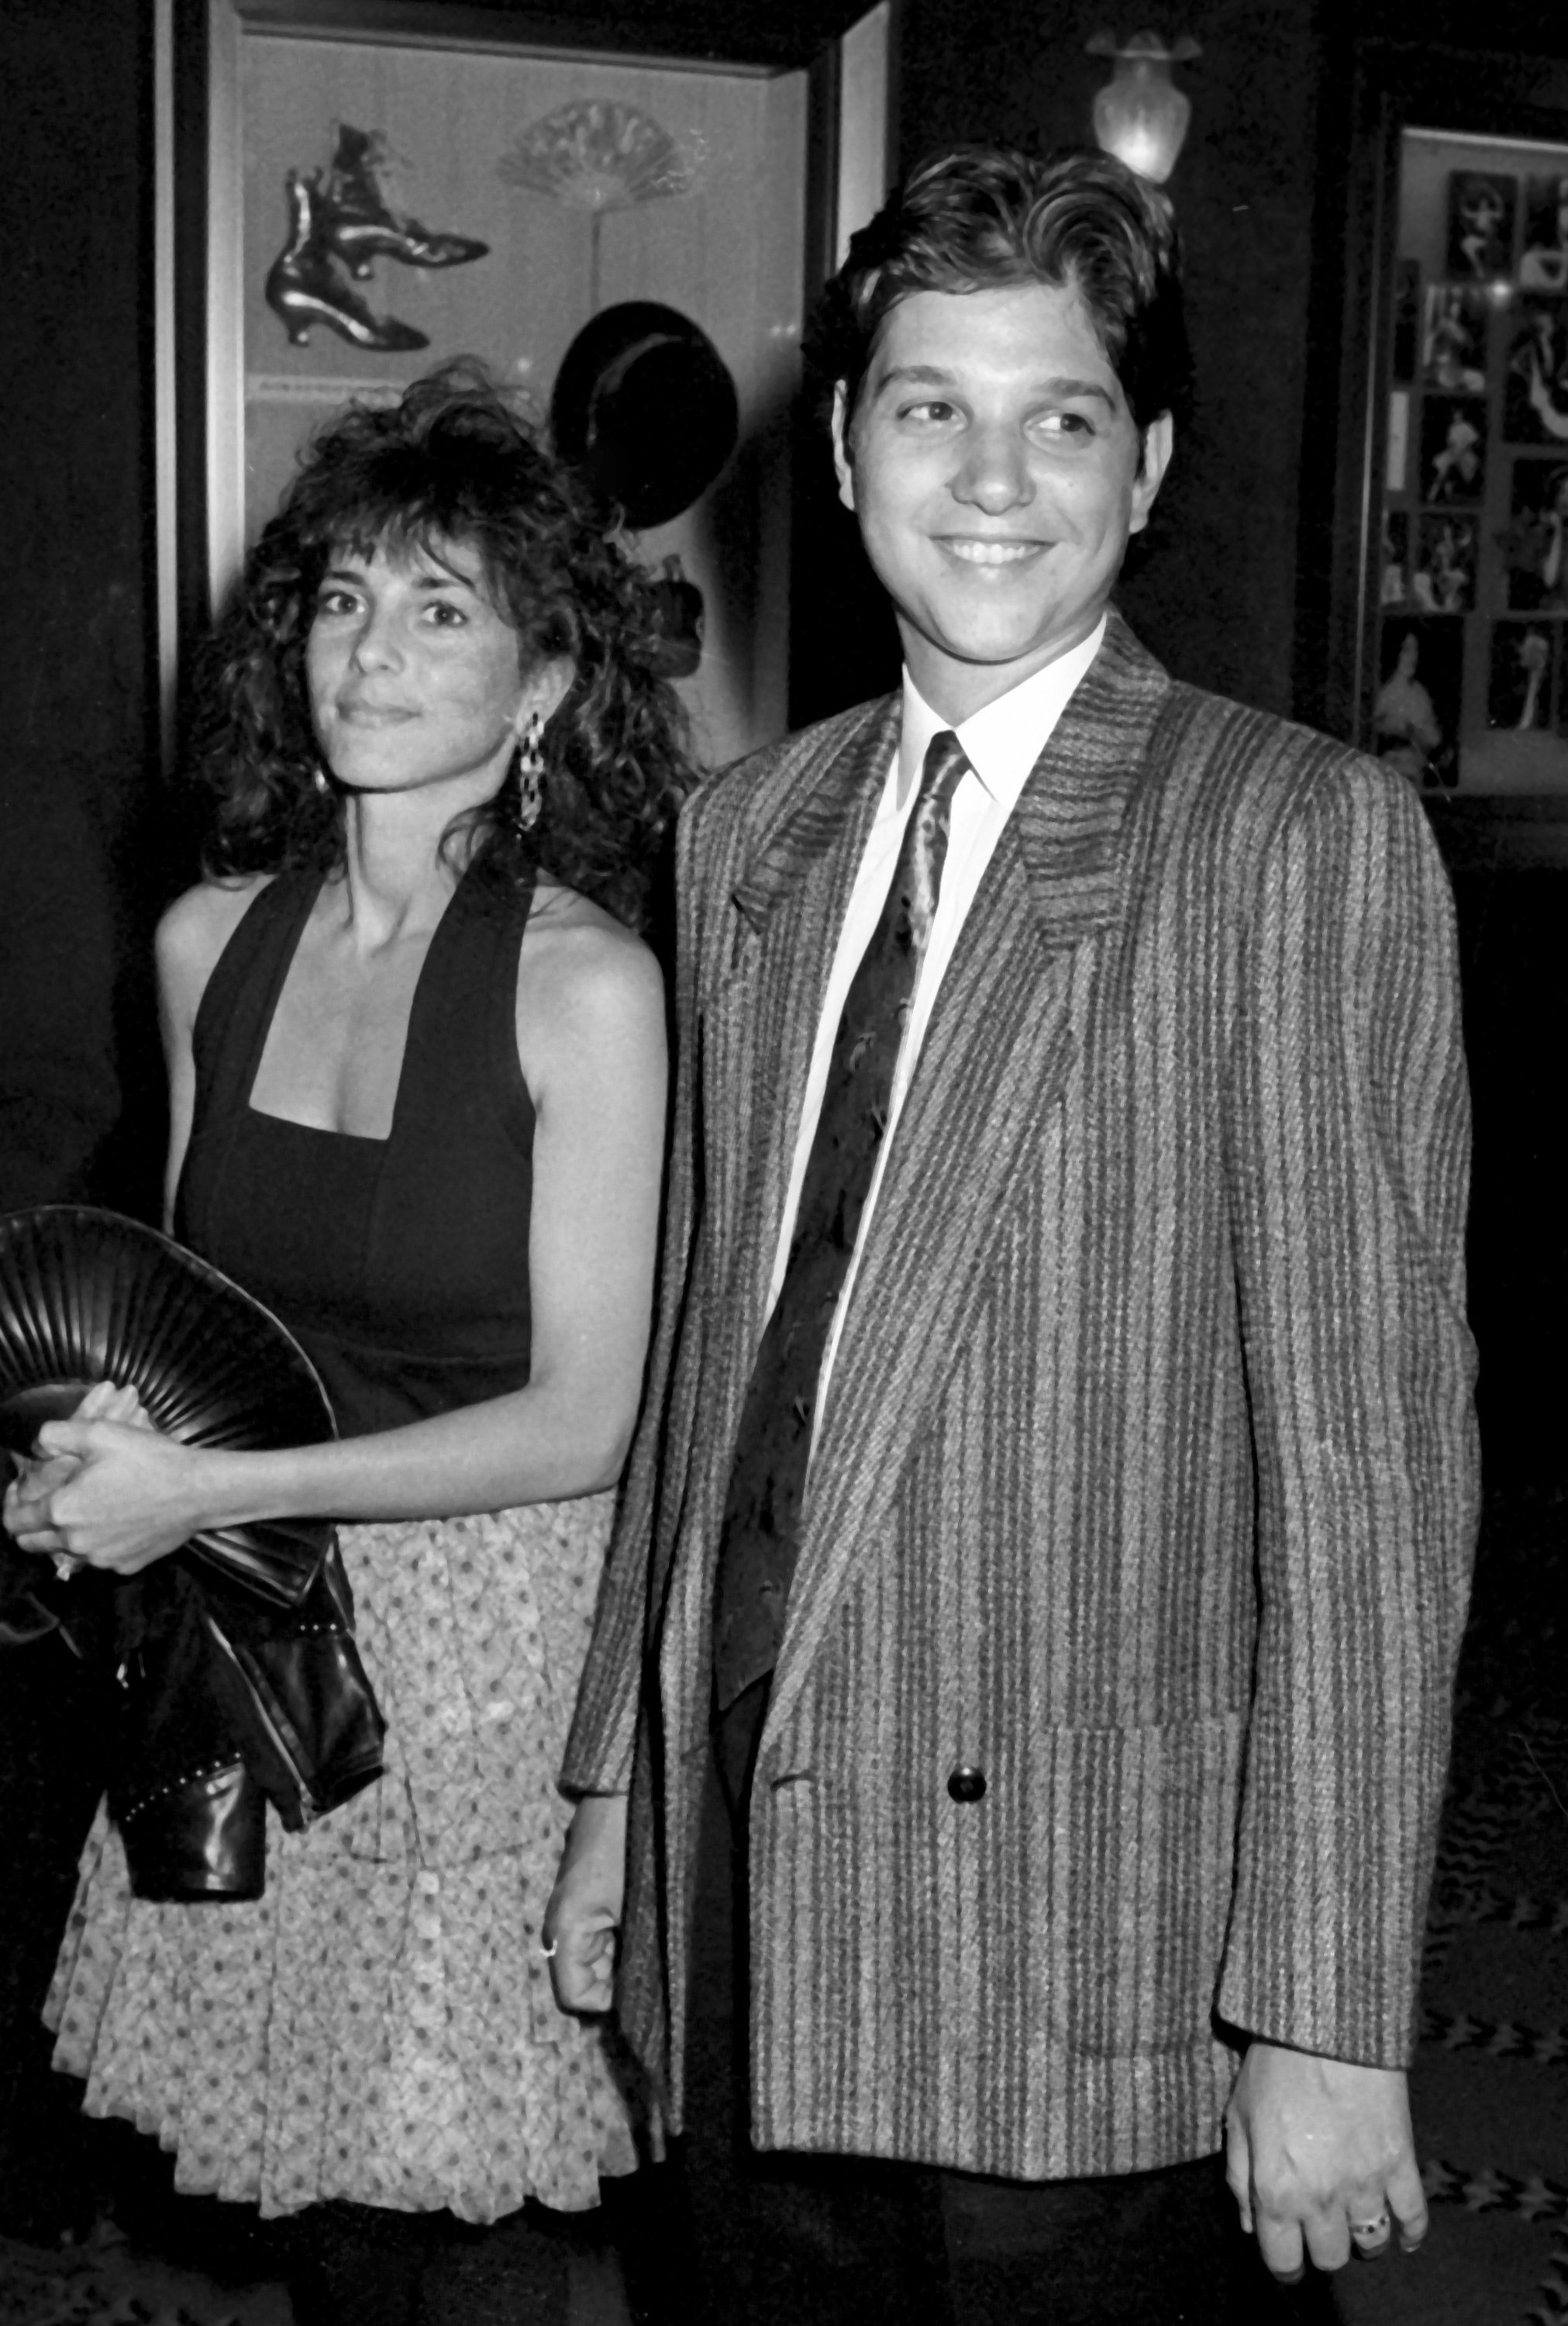 Ralph Macchio and wife, Phyllis Fierro, at "Great Balls of Fire" Premiere on June 26, 1989 at the Ziegfeld Theater in New York City. | Source: Getty Images